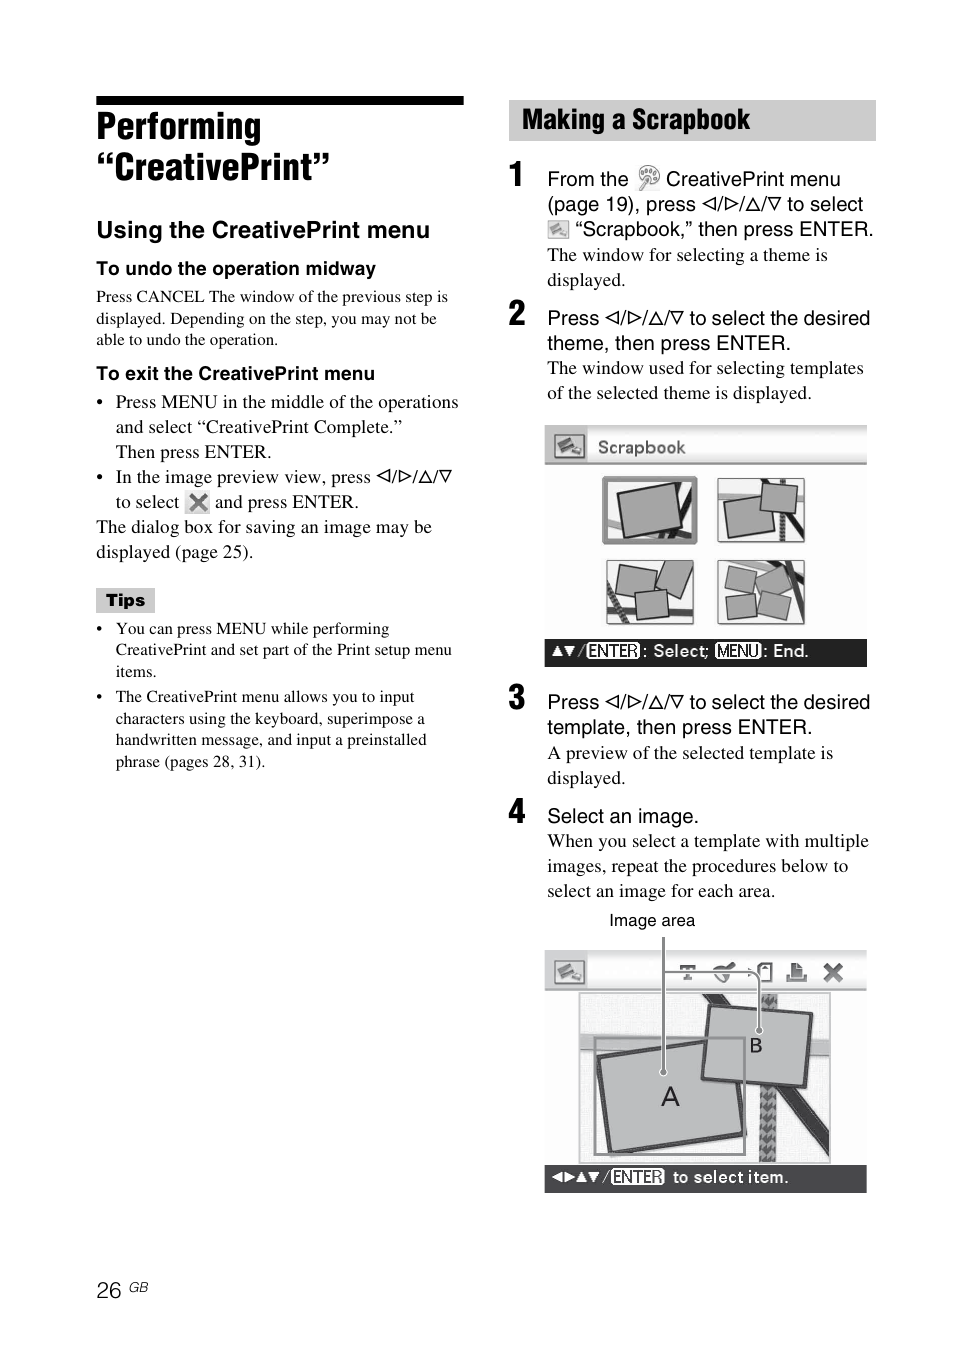 Performing “creativeprint, Making a scrapbook | Sony DPP-FP97 User Manual | Page 26 / 88